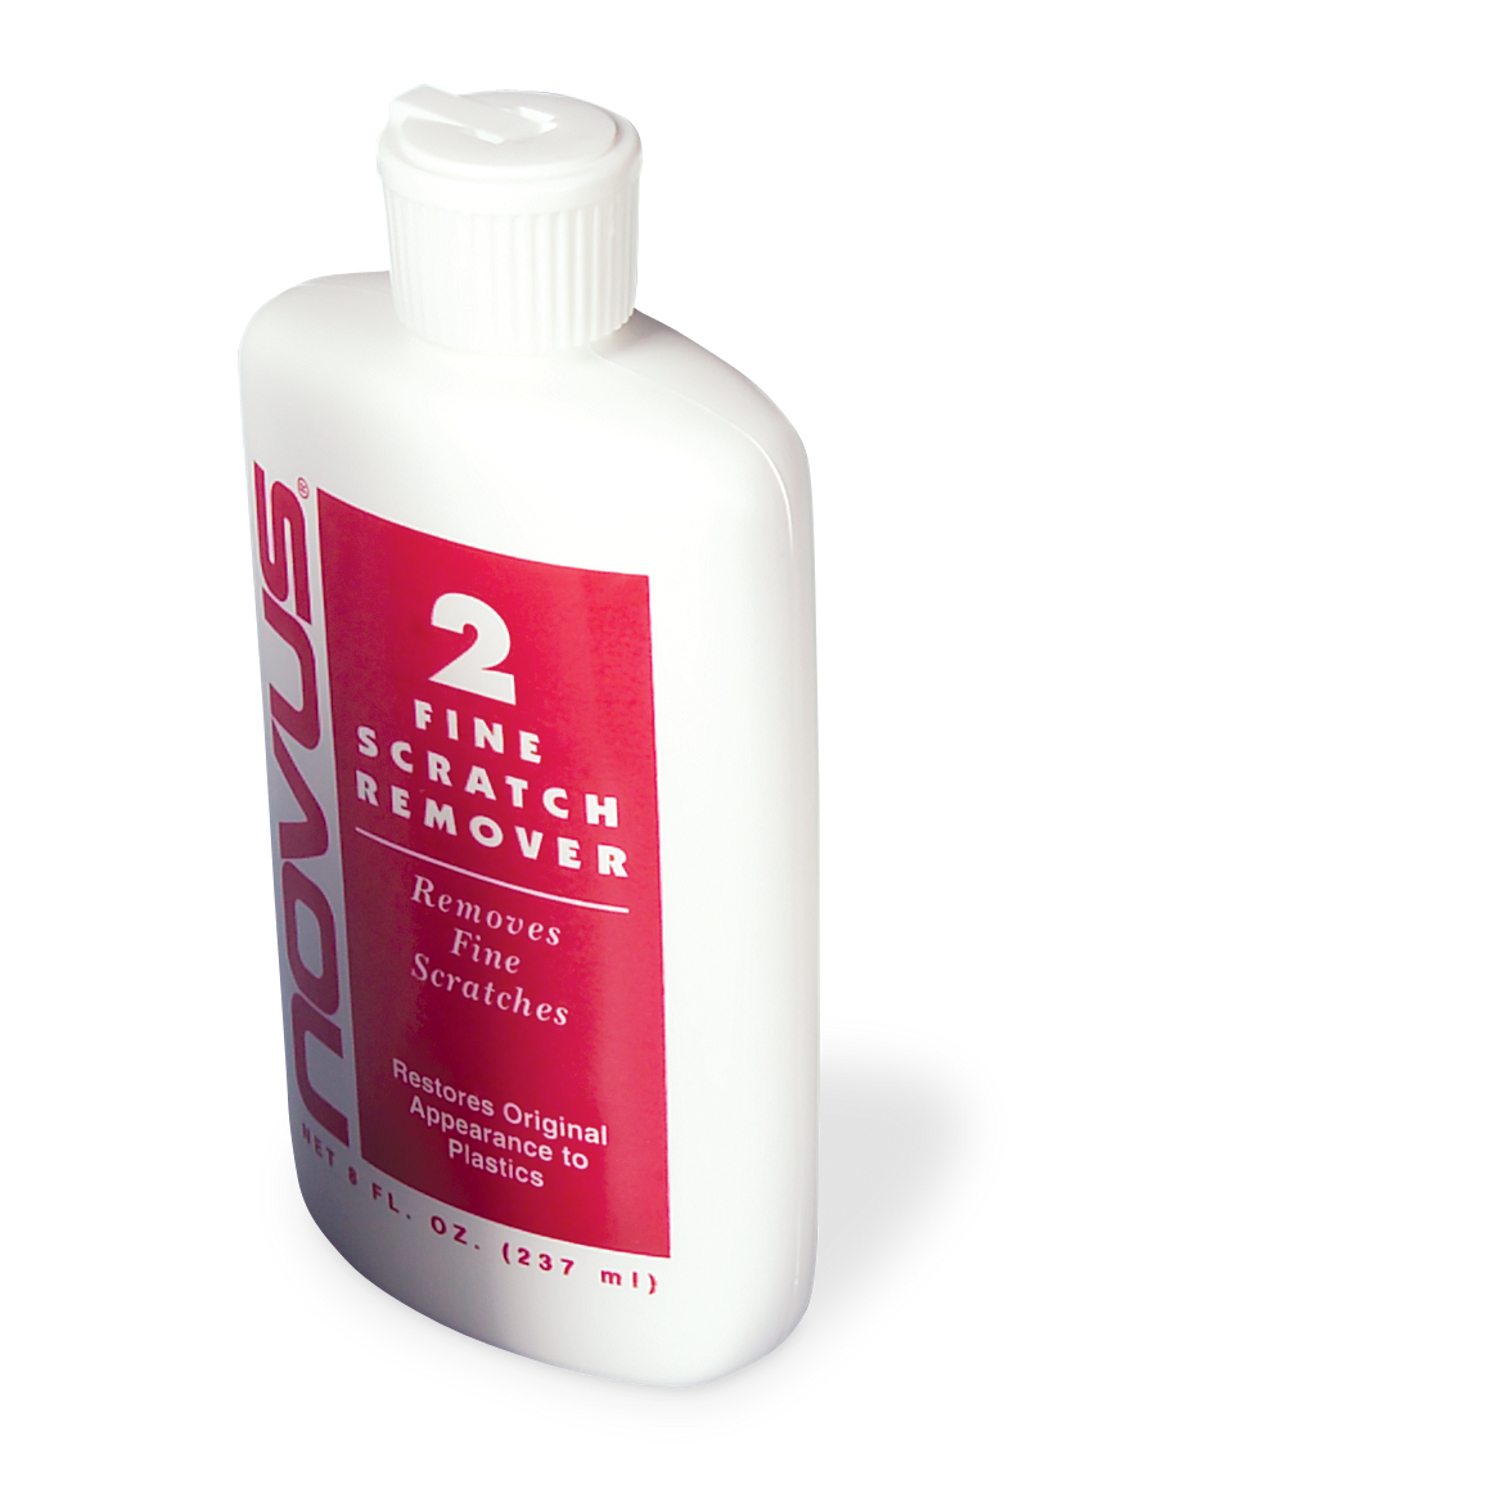 NOVUS 2 Fine Scratch Remover, Cleaners, Cleaning Supplies & Equipment, Exhibit & Display